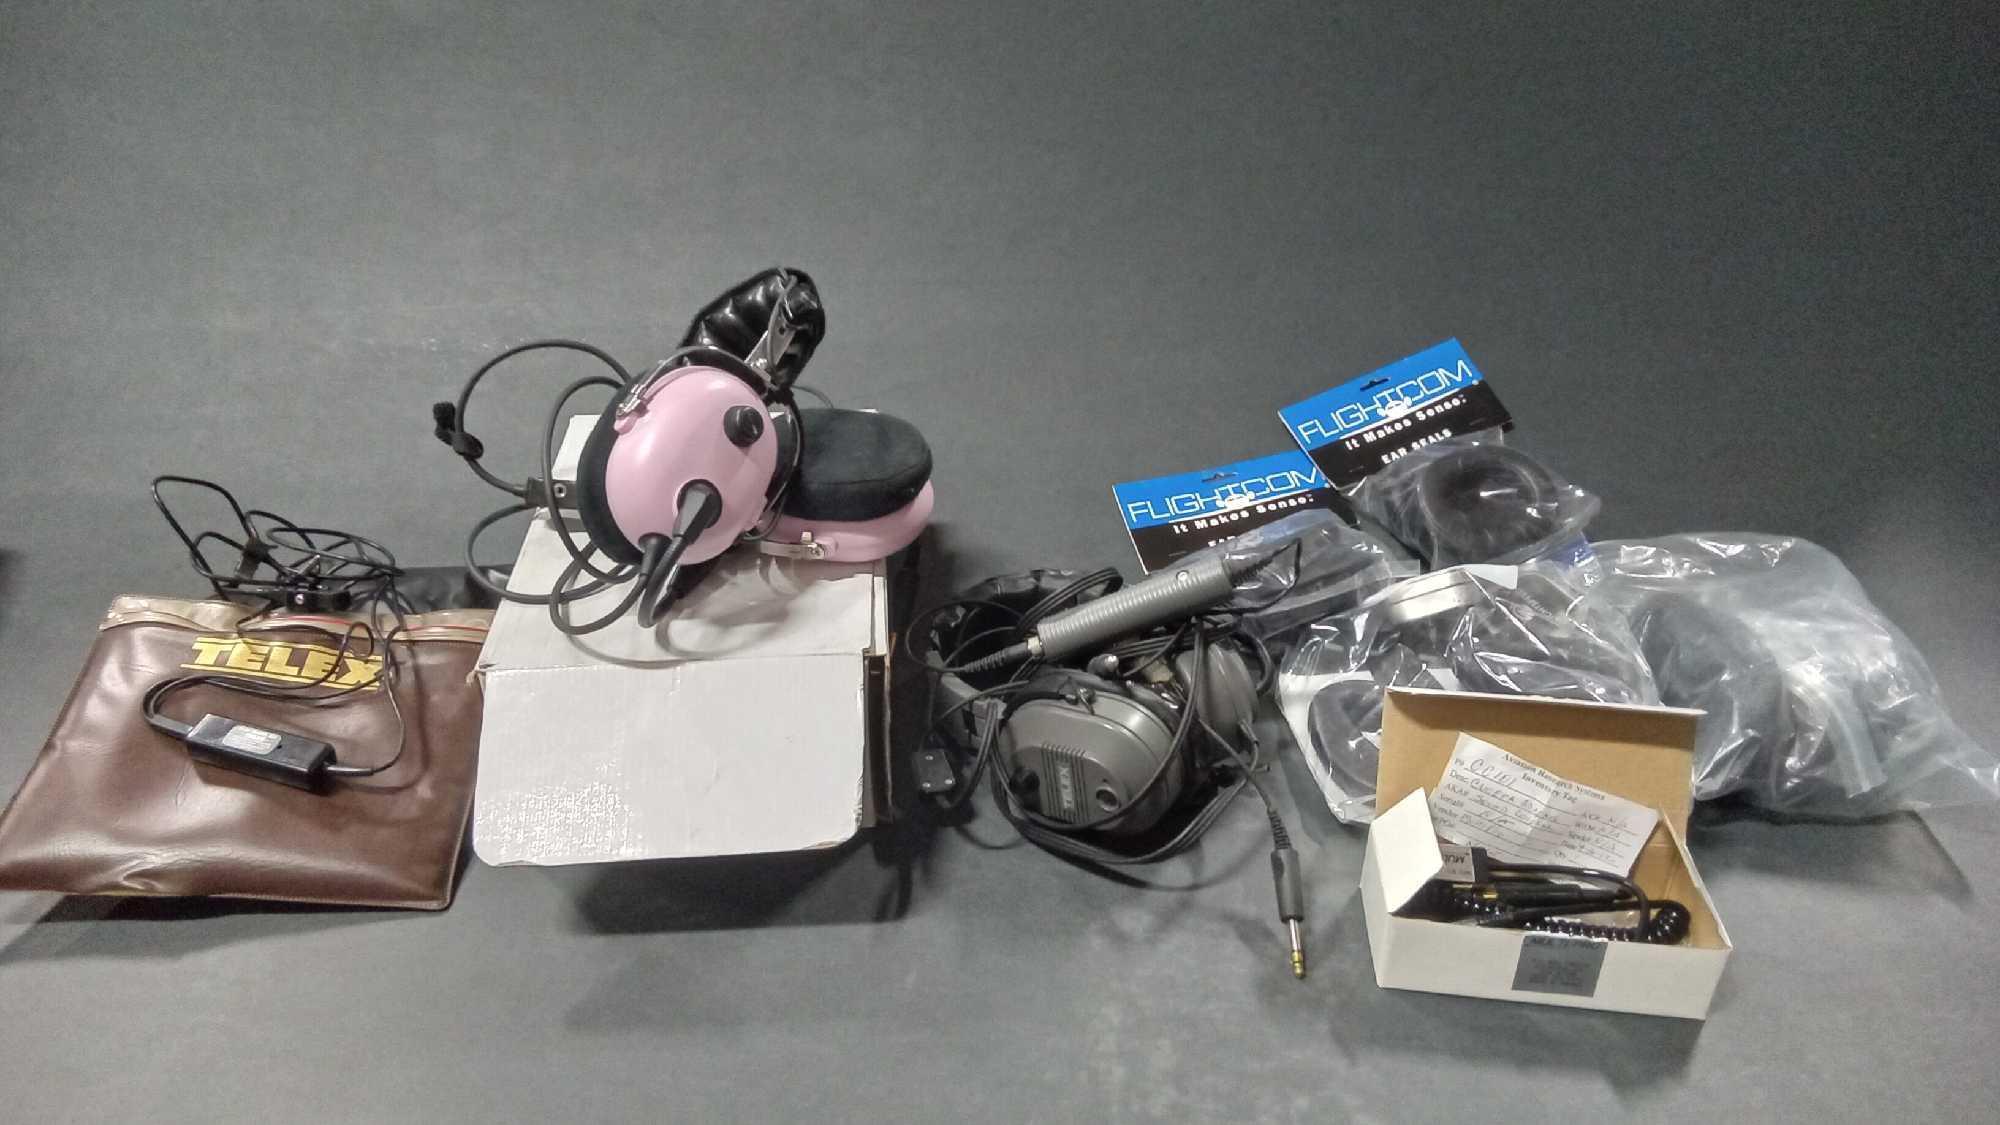 BOXES OF HEADSETS & HEADSET INVENTORY